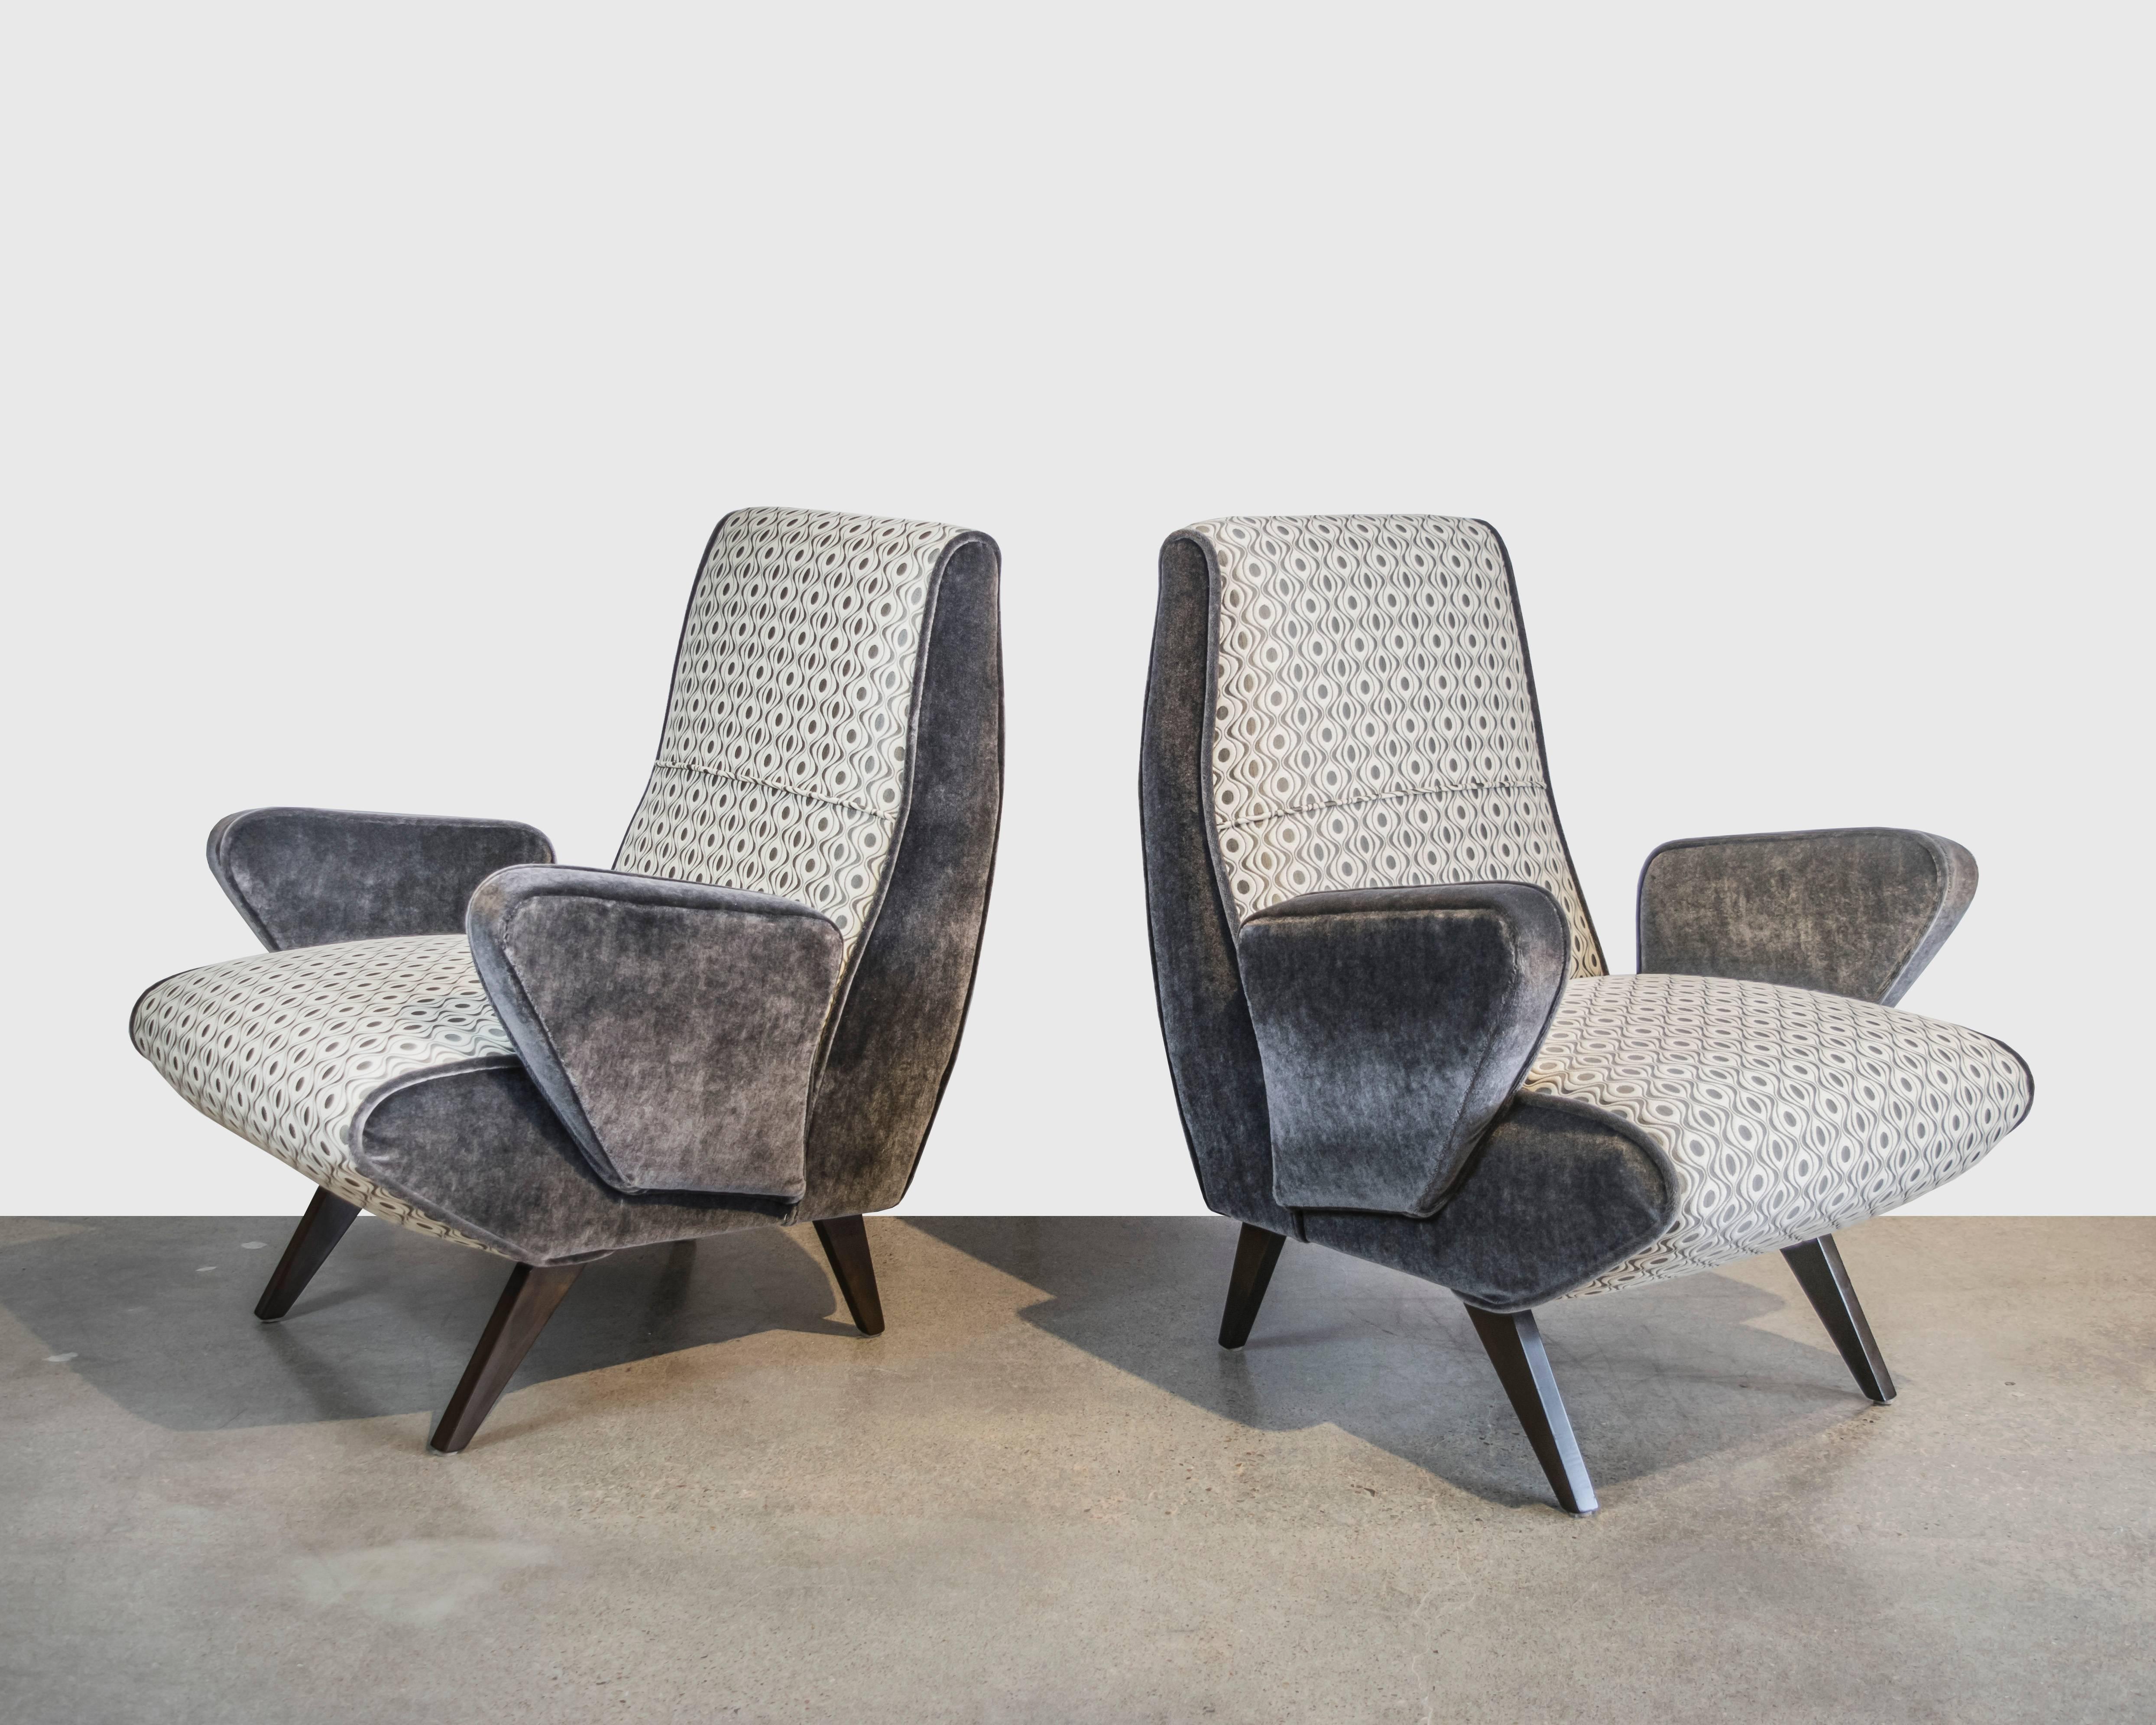 These are a pair of beautifully designed Italian Mid-Century armchairs with Donghia mohair surround and Pollack geometrical fabric on the seating. With ebonized wooden legs (matching settee available on a separate listing).